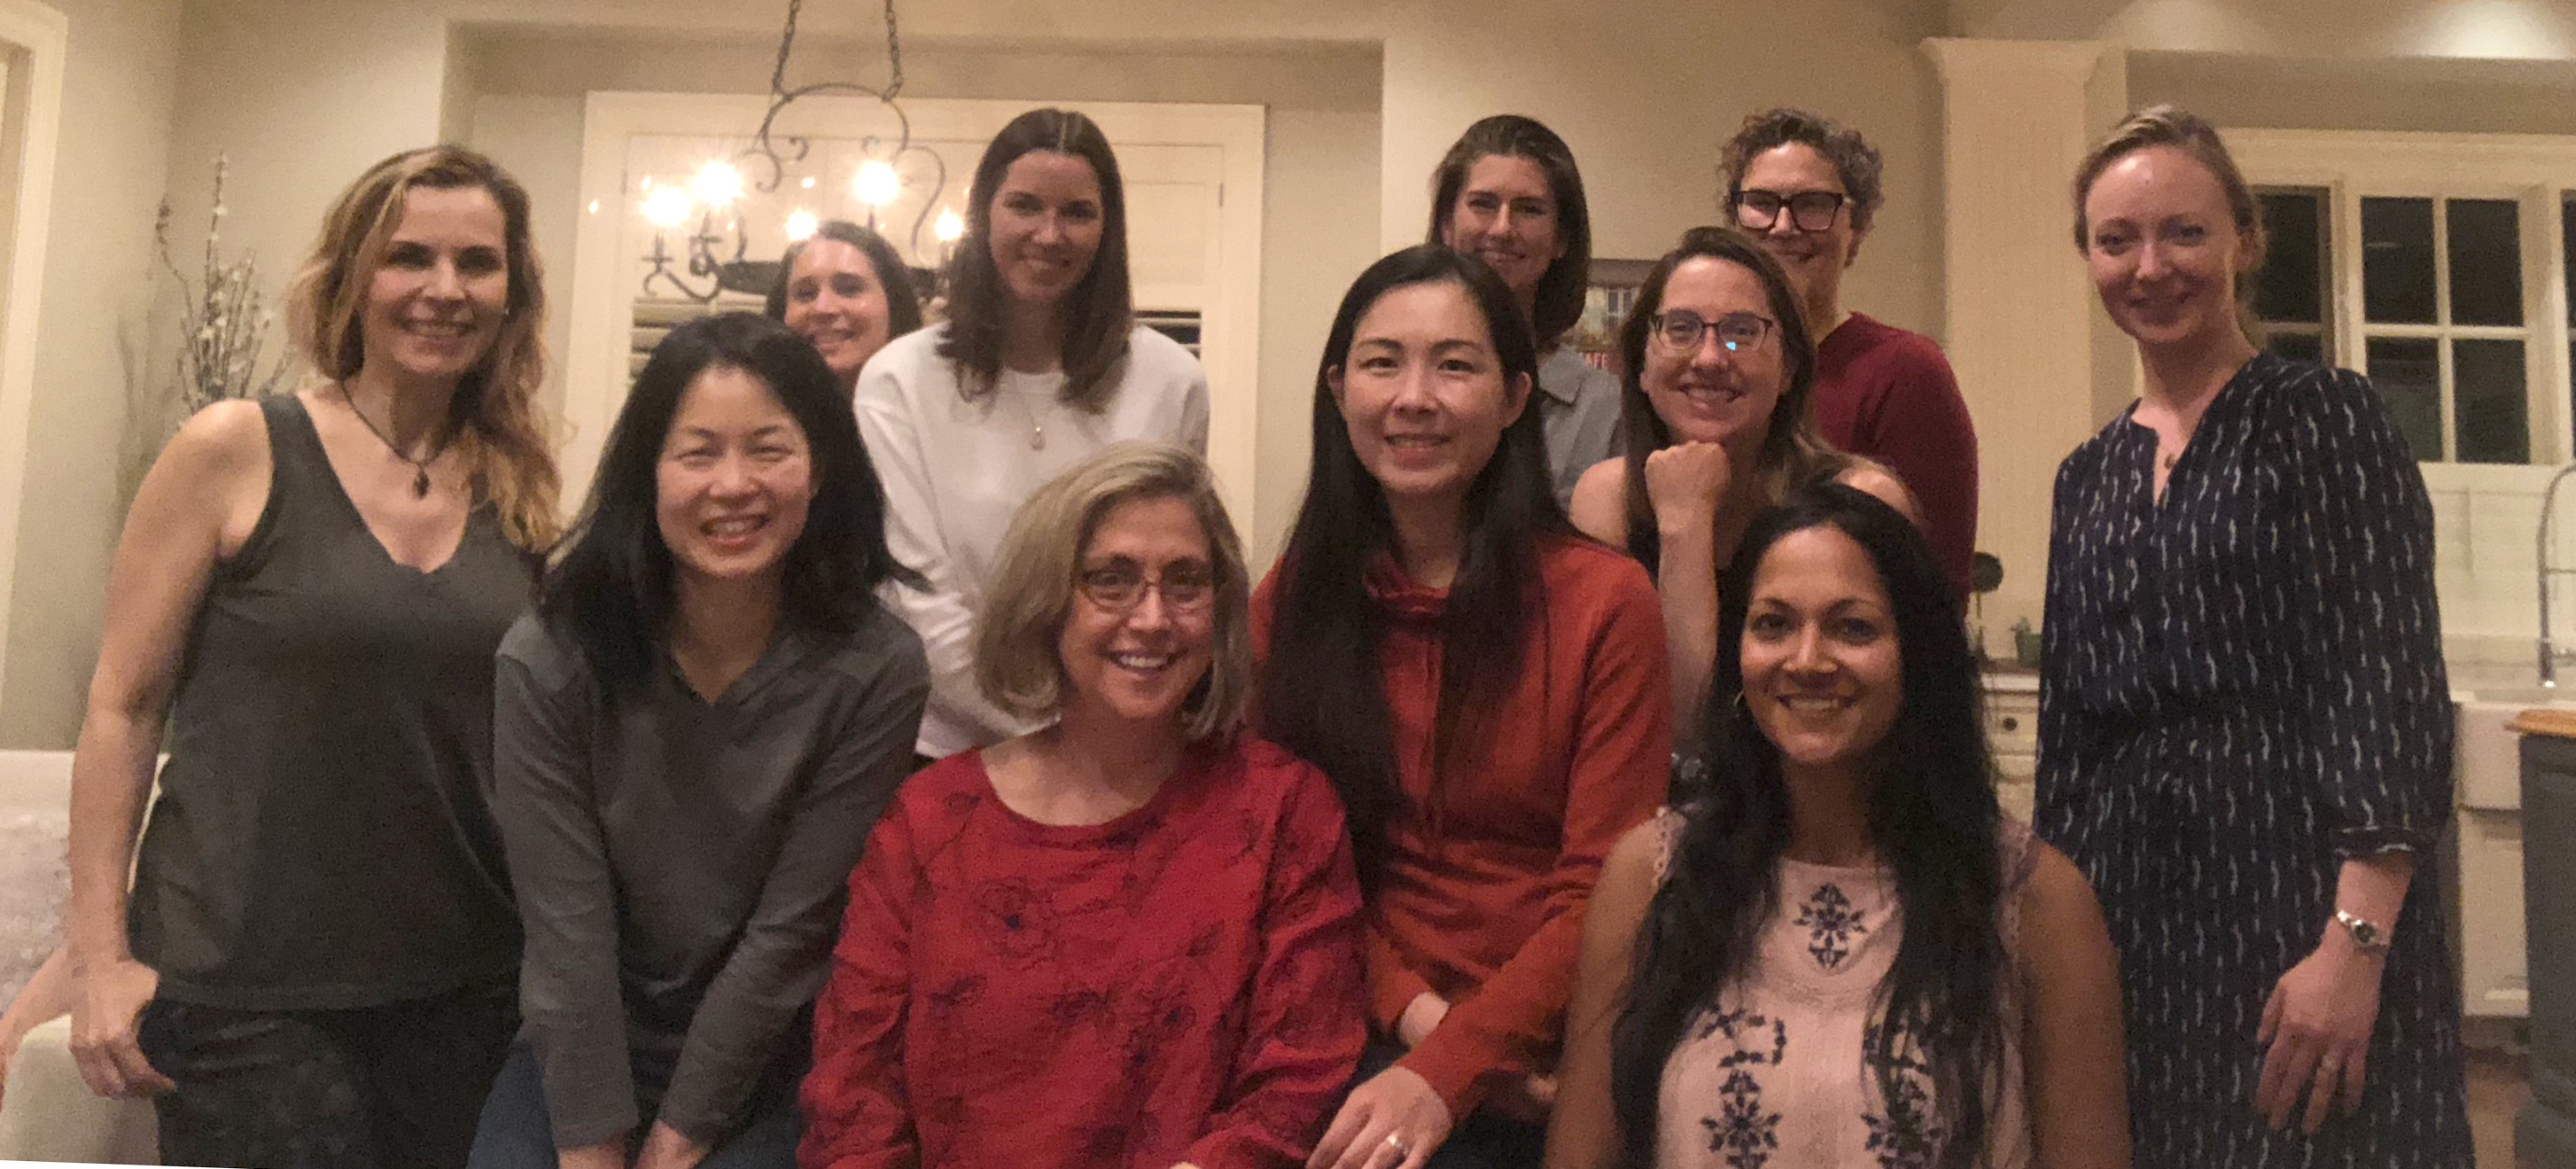 Group of 11 women pictured from Diagnostic Radiology, Women in Radiology event 05/20/2021